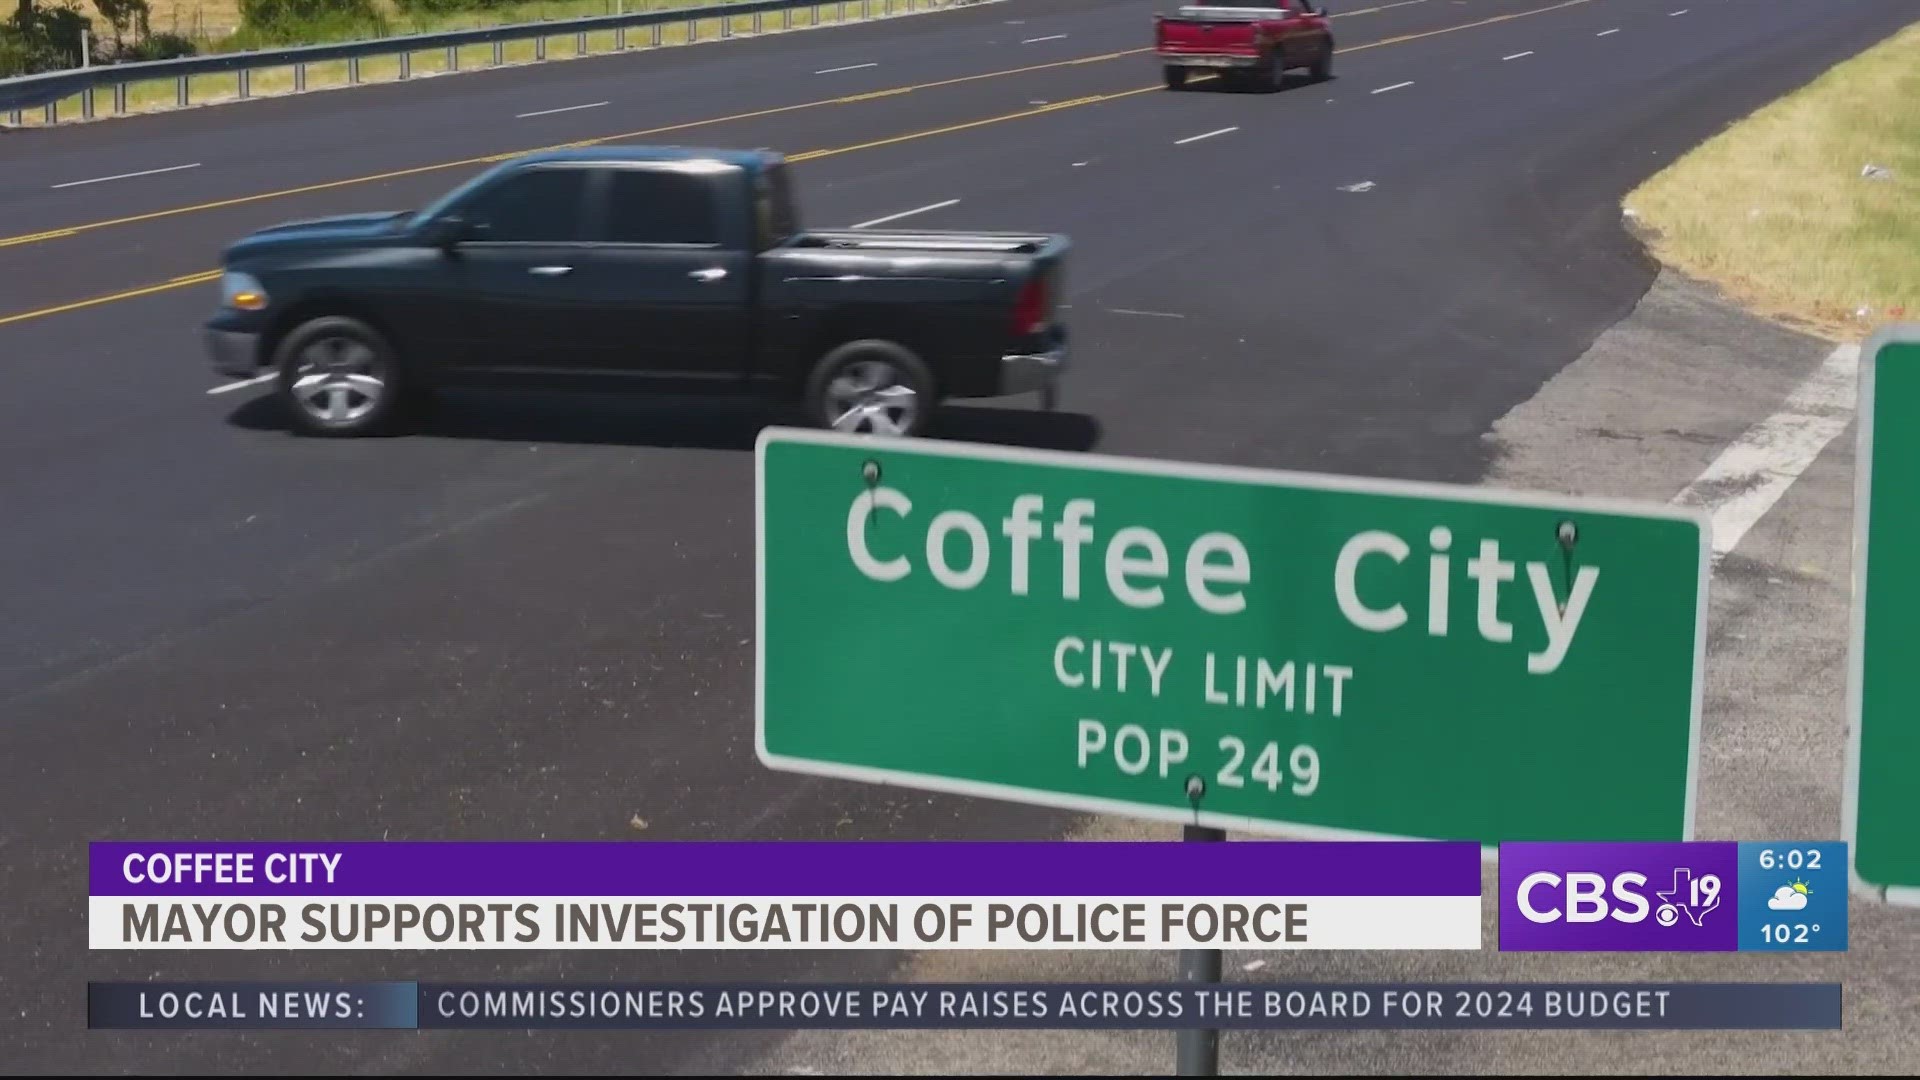 The Texas Commission on Law Enforcement said on Wednesday that the agency is conducting an open investigation into the Coffee City Police Department.